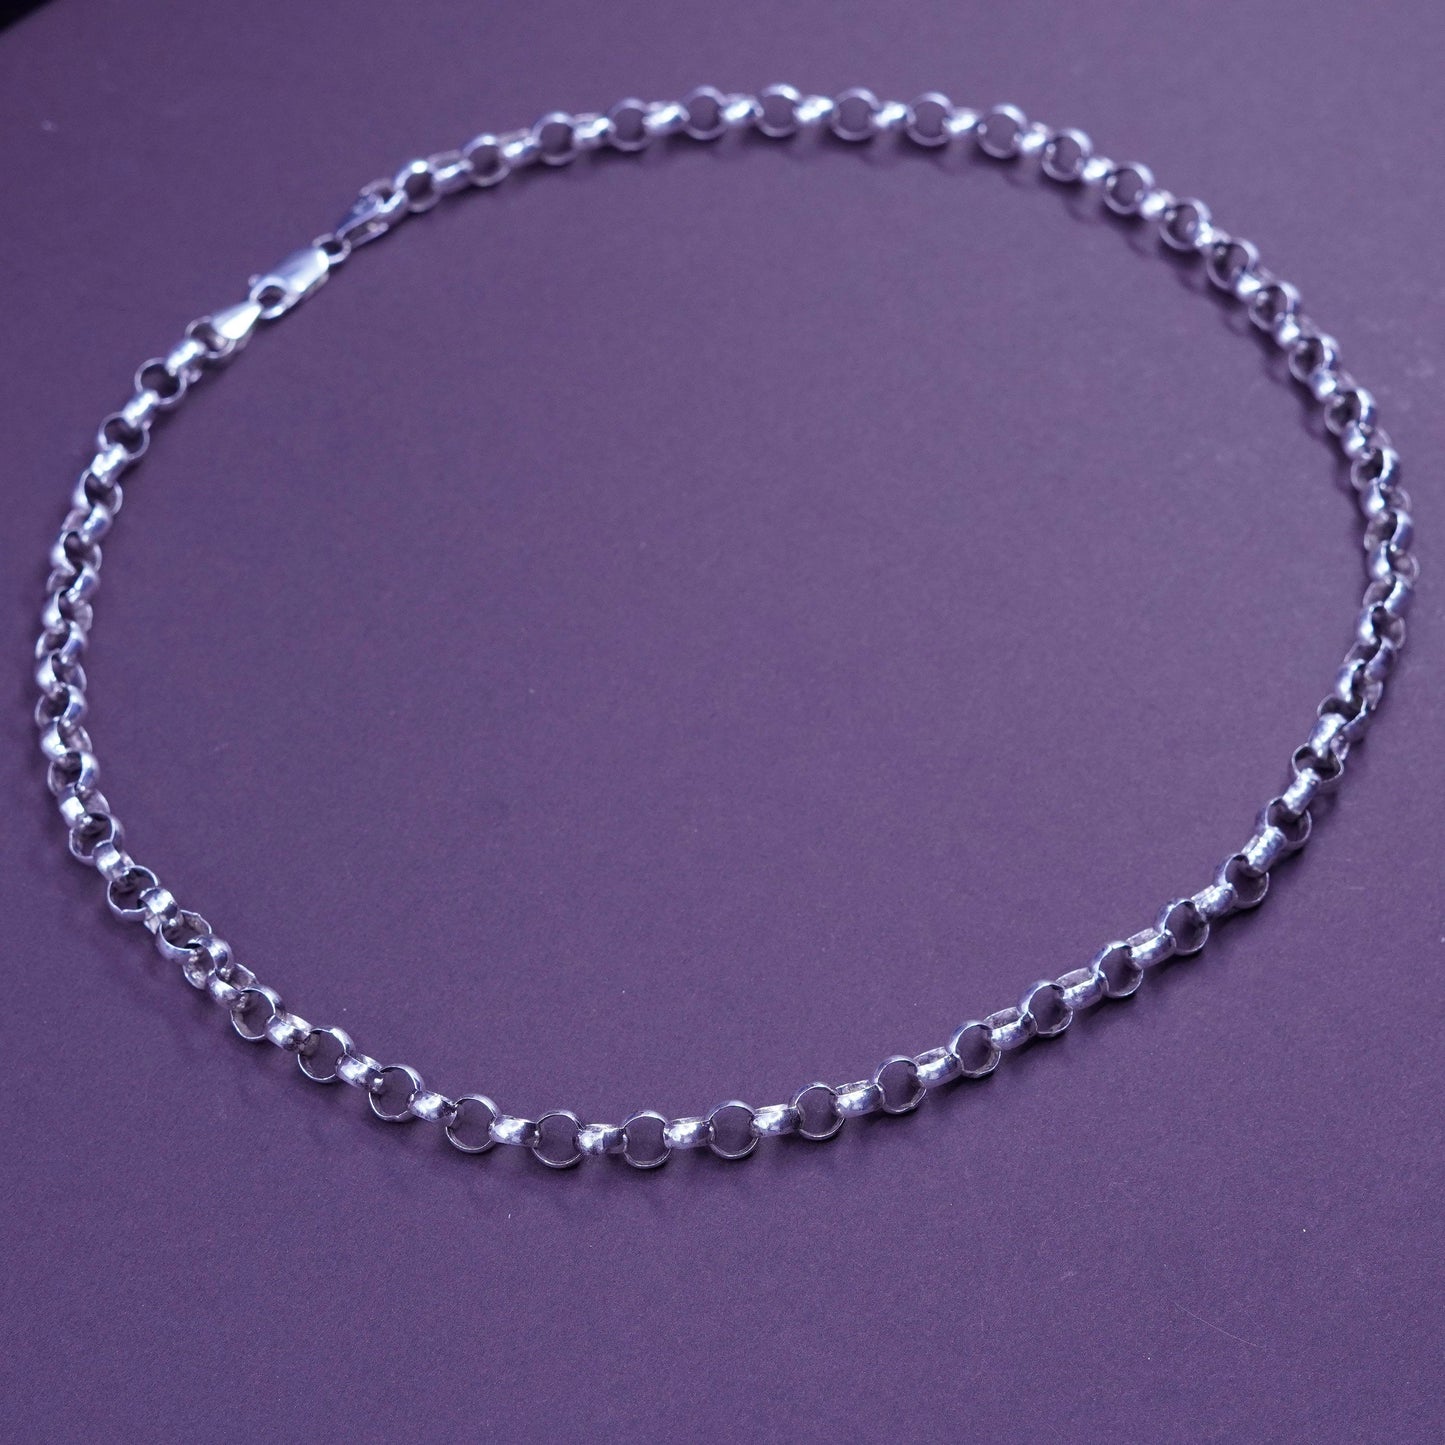 19”, 7mm, vintage Sterling silver necklace, 925 bold circle link chain